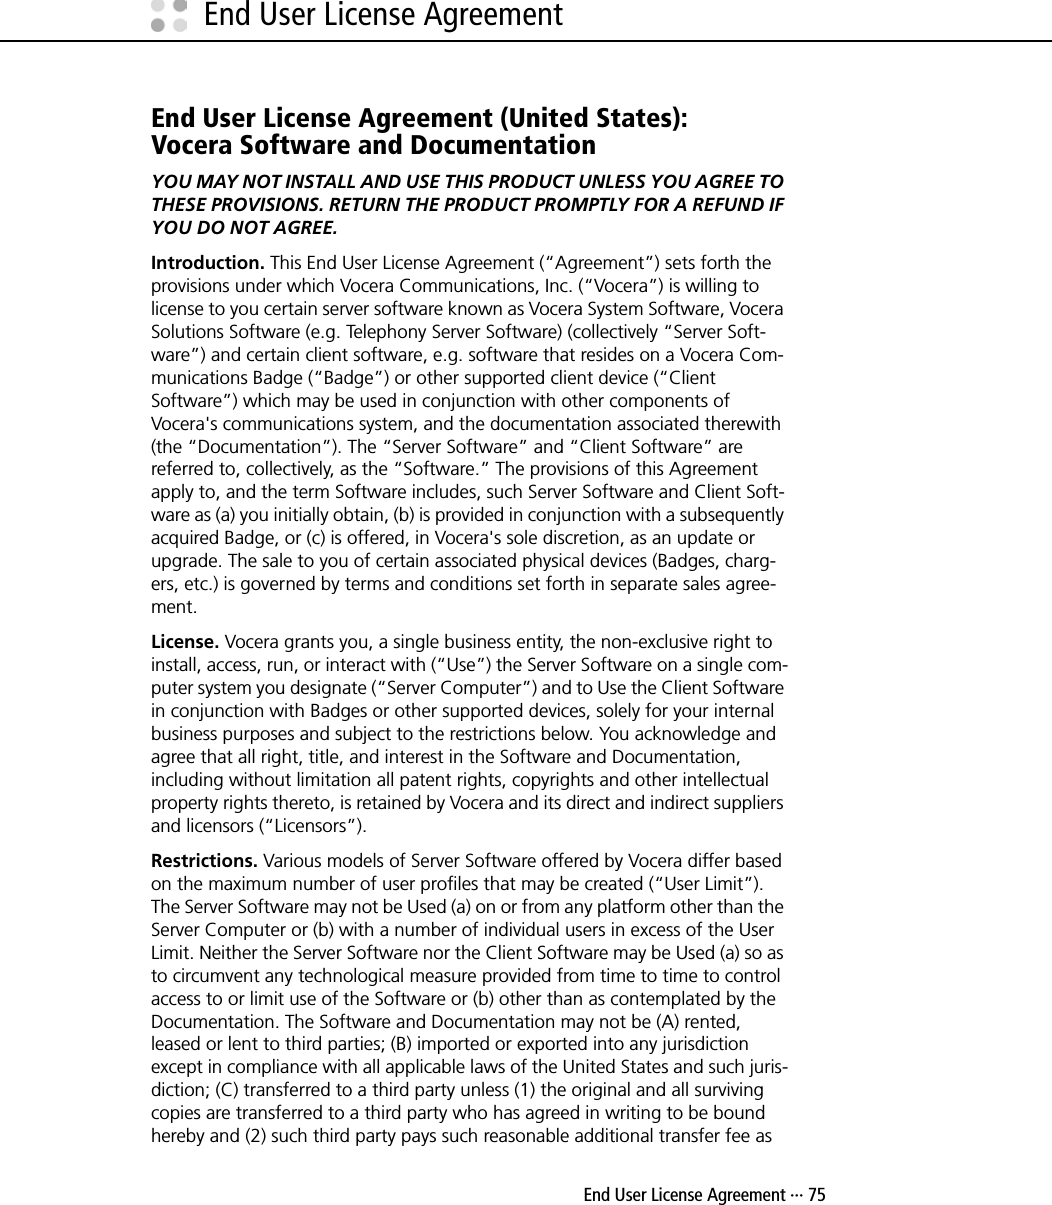  End User License Agreement ··· 75End User License AgreementEnd User License Agreement (United States):Vocera Software and DocumentationYOU MAY NOT INSTALL AND USE THIS PRODUCT UNLESS YOU AGREE TO THESE PROVISIONS. RETURN THE PRODUCT PROMPTLY FOR A REFUND IF YOU DO NOT AGREE.Introduction. This End User License Agreement (“Agreement”) sets forth the provisions under which Vocera Communications, Inc. (“Vocera”) is willing to license to you certain server software known as Vocera System Software, Vocera Solutions Software (e.g. Telephony Server Software) (collectively “Server Soft-ware”) and certain client software, e.g. software that resides on a Vocera Com-munications Badge (“Badge”) or other supported client device (“Client Software”) which may be used in conjunction with other components of Vocera&apos;s communications system, and the documentation associated therewith (the “Documentation”). The “Server Software” and “Client Software” are referred to, collectively, as the “Software.” The provisions of this Agreement apply to, and the term Software includes, such Server Software and Client Soft-ware as (a) you initially obtain, (b) is provided in conjunction with a subsequently acquired Badge, or (c) is offered, in Vocera&apos;s sole discretion, as an update or upgrade. The sale to you of certain associated physical devices (Badges, charg-ers, etc.) is governed by terms and conditions set forth in separate sales agree-ment.License. Vocera grants you, a single business entity, the non-exclusive right to install, access, run, or interact with (“Use”) the Server Software on a single com-puter system you designate (“Server Computer”) and to Use the Client Software in conjunction with Badges or other supported devices, solely for your internal business purposes and subject to the restrictions below. You acknowledge and agree that all right, title, and interest in the Software and Documentation, including without limitation all patent rights, copyrights and other intellectual property rights thereto, is retained by Vocera and its direct and indirect suppliers and licensors (“Licensors”).Restrictions. Various models of Server Software offered by Vocera differ based on the maximum number of user profiles that may be created (“User Limit”). The Server Software may not be Used (a) on or from any platform other than the Server Computer or (b) with a number of individual users in excess of the User Limit. Neither the Server Software nor the Client Software may be Used (a) so as to circumvent any technological measure provided from time to time to control access to or limit use of the Software or (b) other than as contemplated by the Documentation. The Software and Documentation may not be (A) rented, leased or lent to third parties; (B) imported or exported into any jurisdiction except in compliance with all applicable laws of the United States and such juris-diction; (C) transferred to a third party unless (1) the original and all surviving copies are transferred to a third party who has agreed in writing to be bound hereby and (2) such third party pays such reasonable additional transfer fee as 